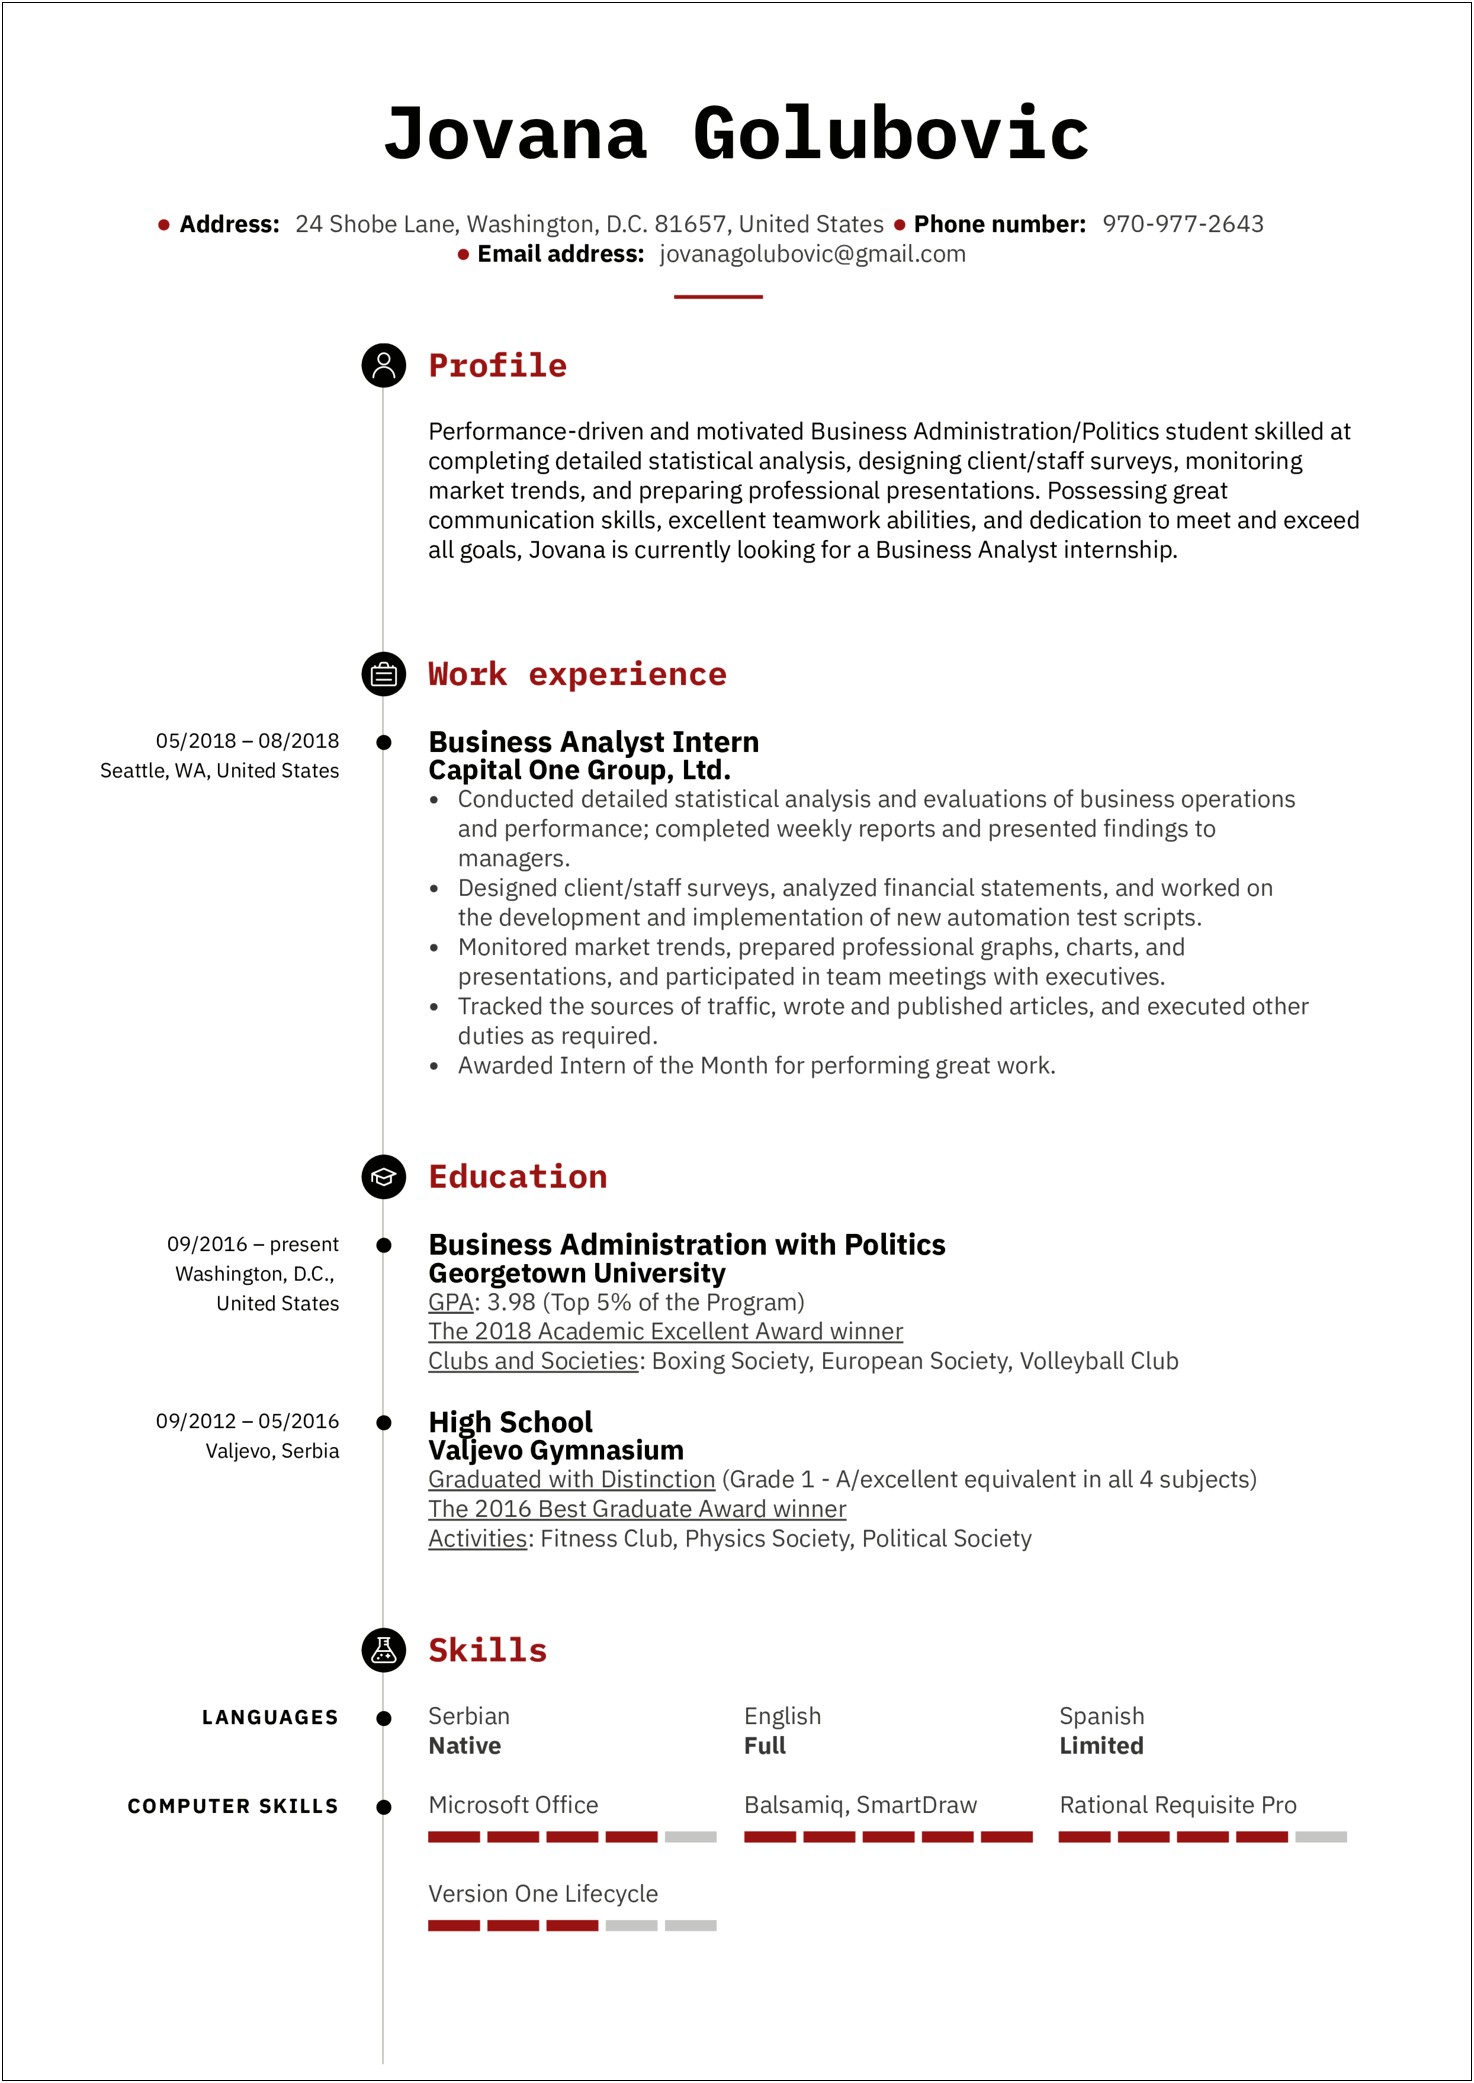 Resume For Business Analyst Position No Experience